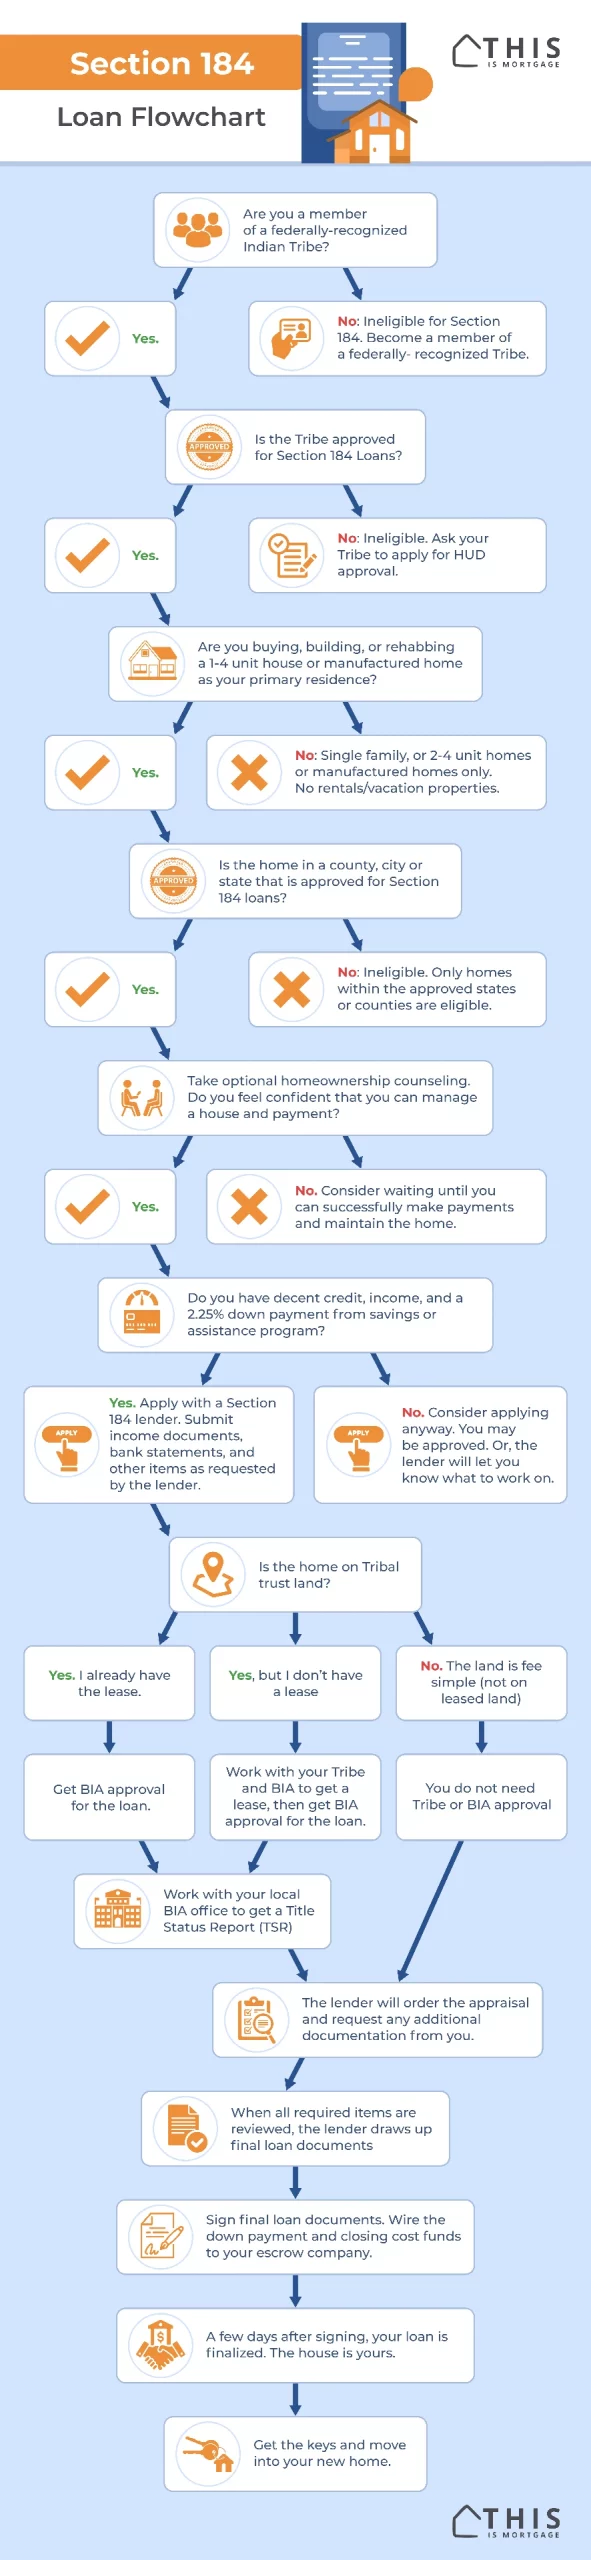 Section 184 Loan Eligibility and Process Flowchart Infographic